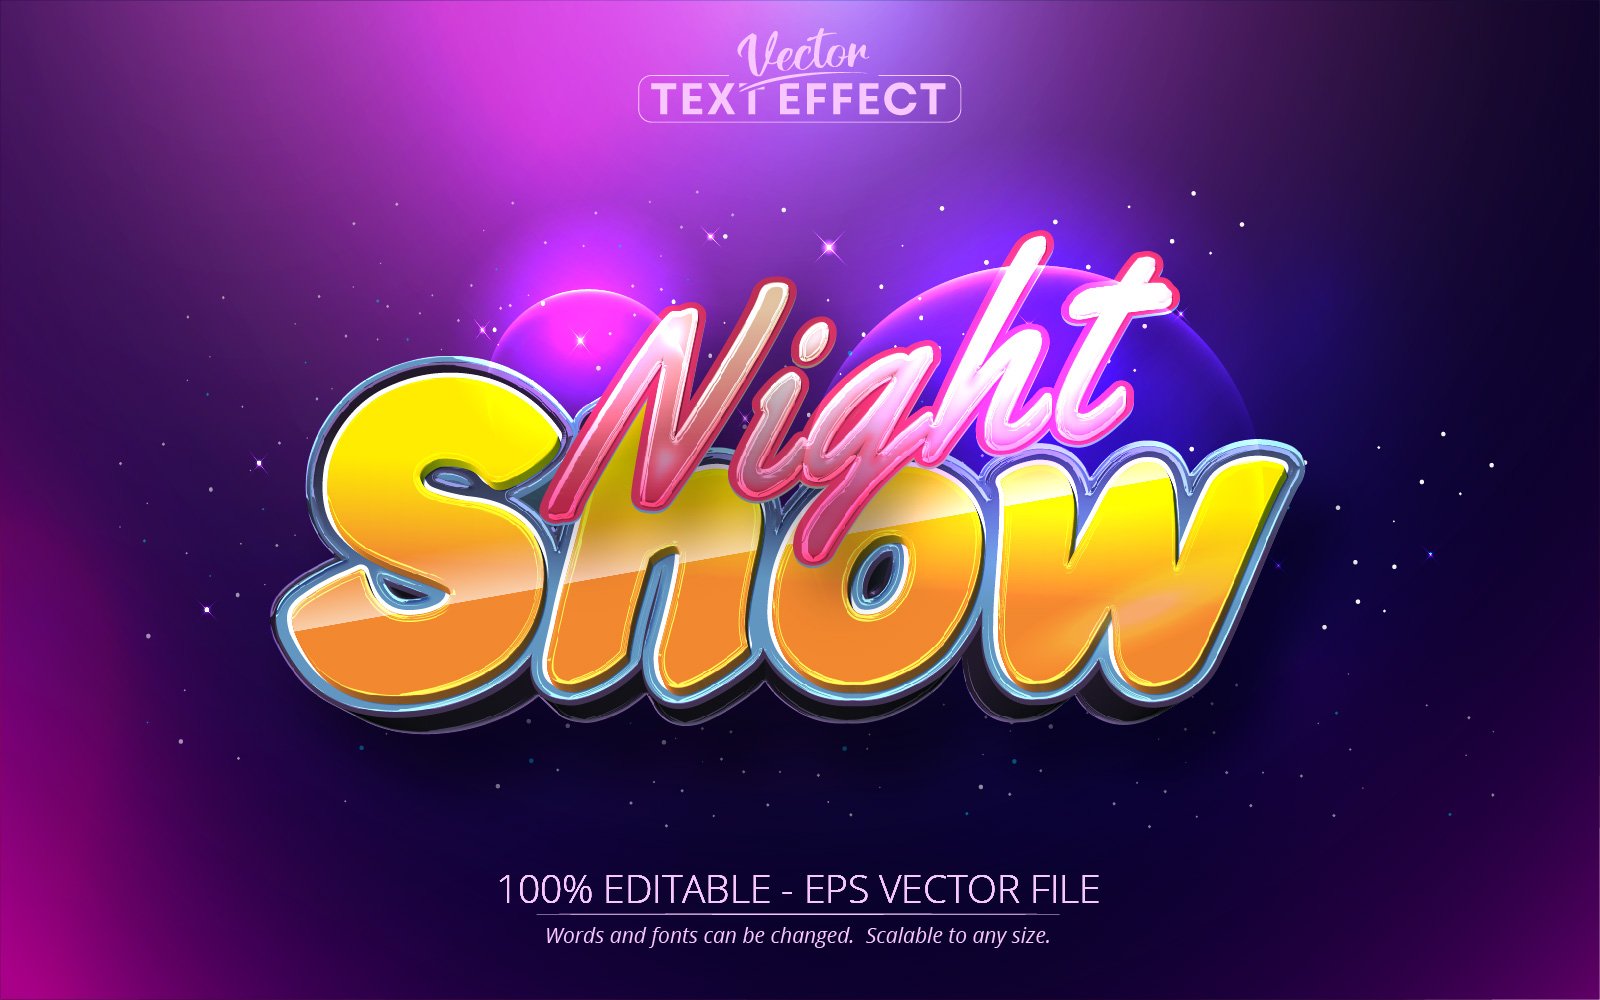 Night Show - Editable Text Effect, Purple And Yellow Cartoon Text Style, Graphics Illustration